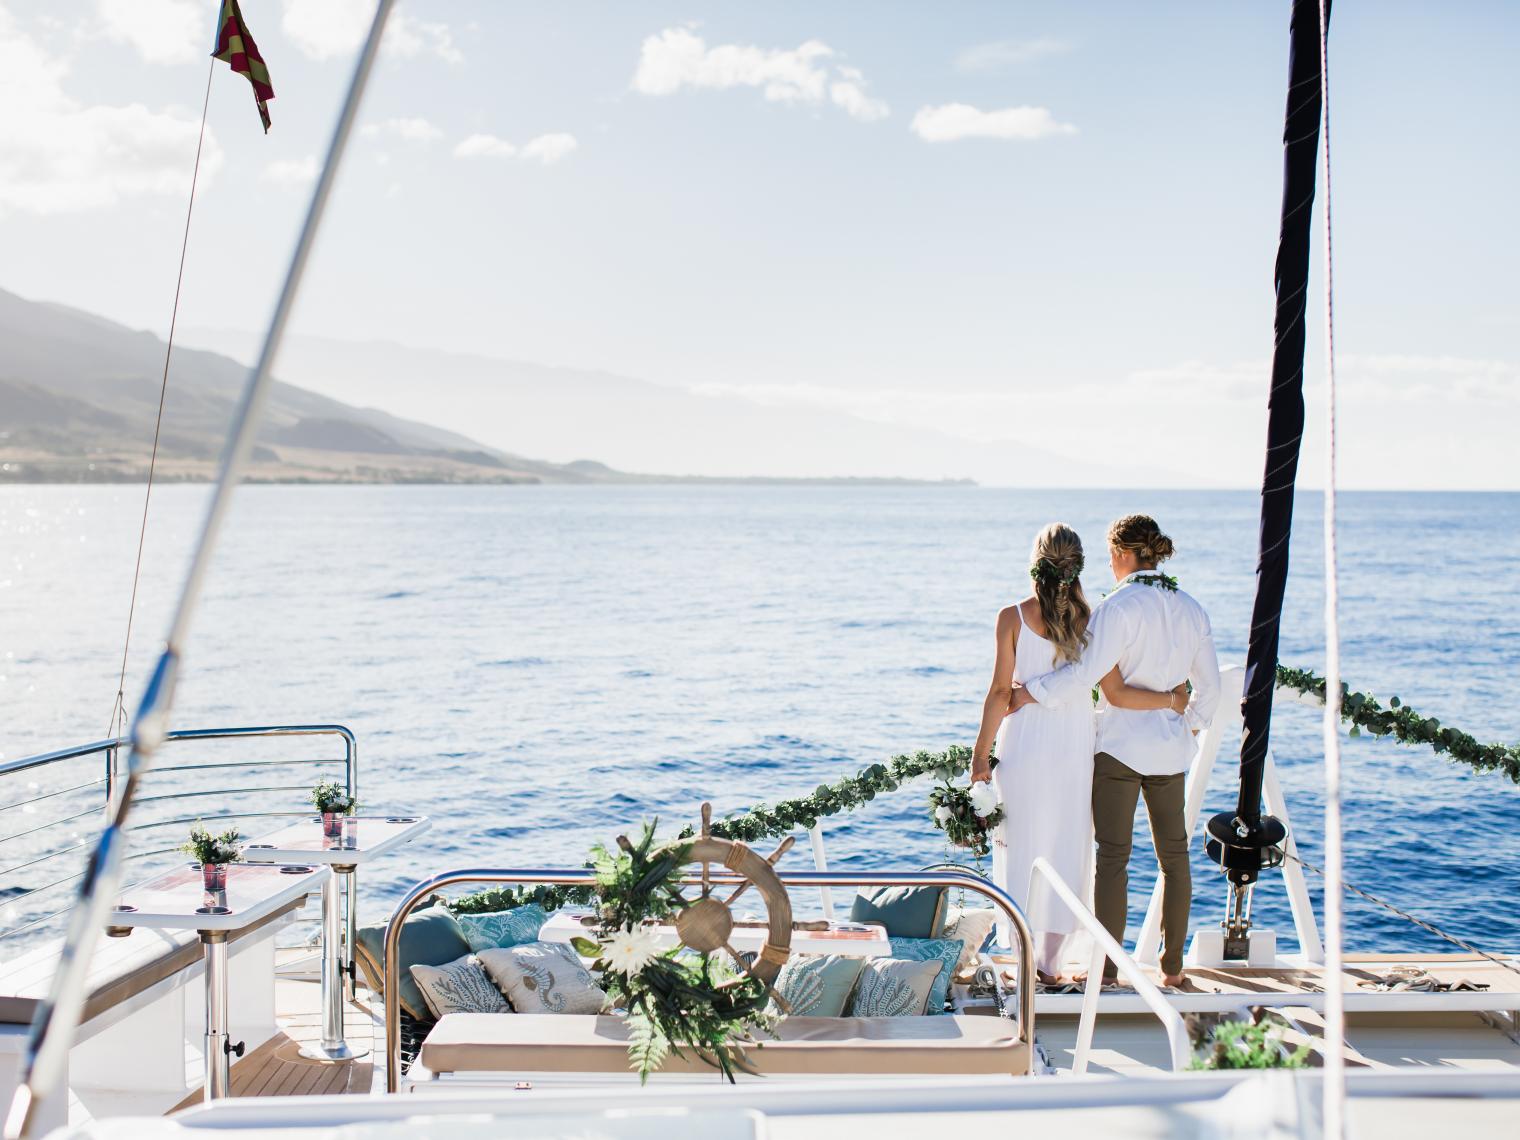 The Best Boating and Floating Wedding Venues Across the World